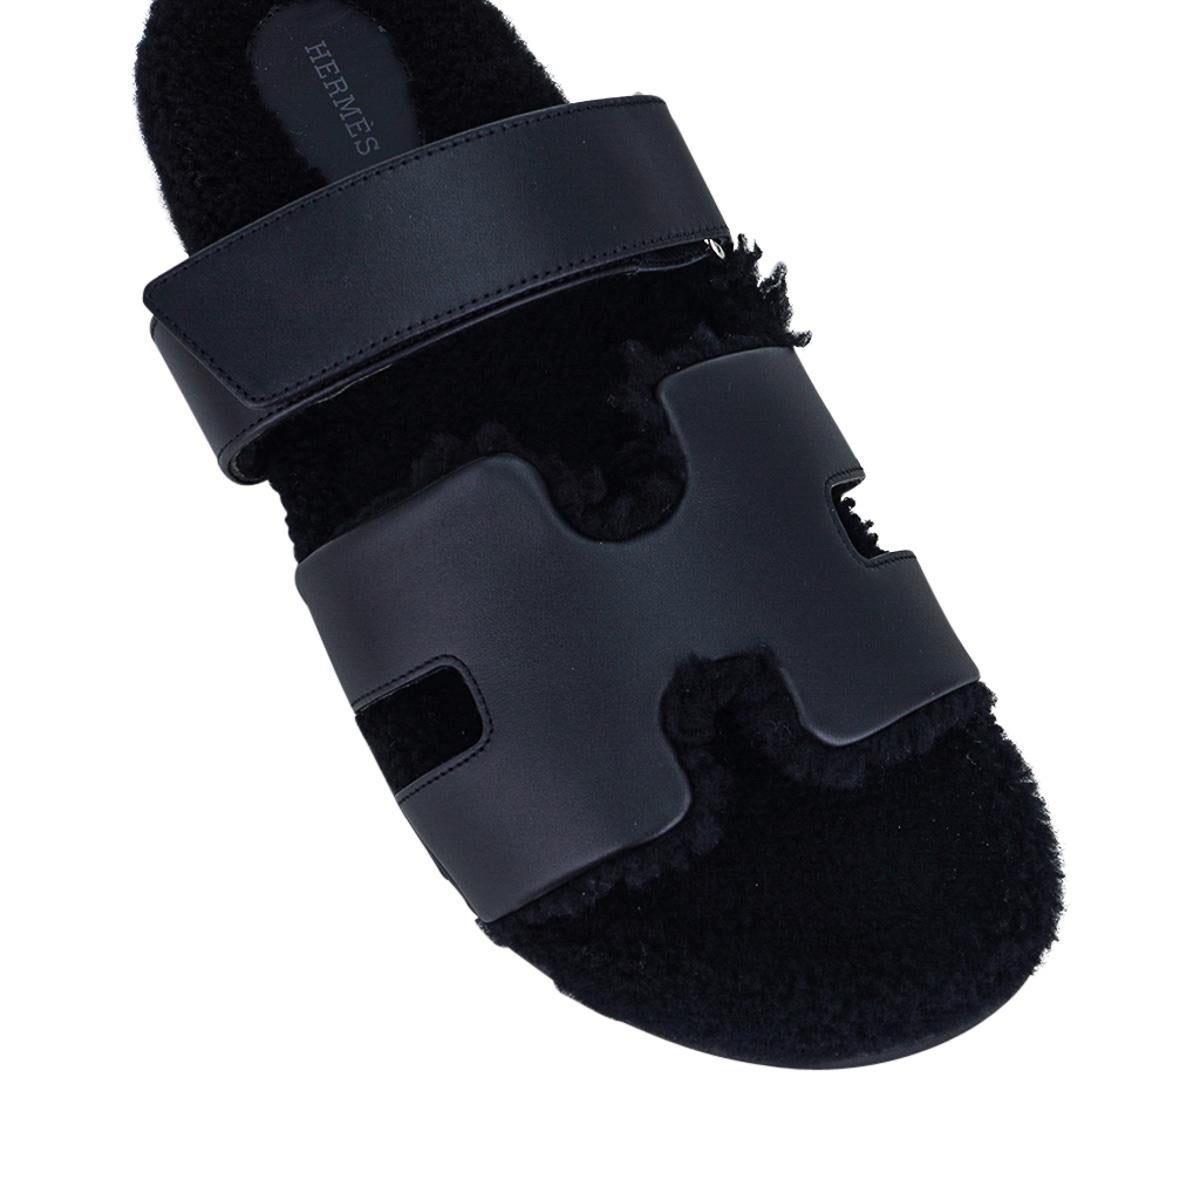 Mightychic offers a pair of limited edition Hermes Men's Black Chypre calfskin and Veau Indios Woolskin sandals.
The iconic H cutout over the top of the foot in calfskin  with black shearling insole and H embossed rubber sole.
Timeless.
Strap across